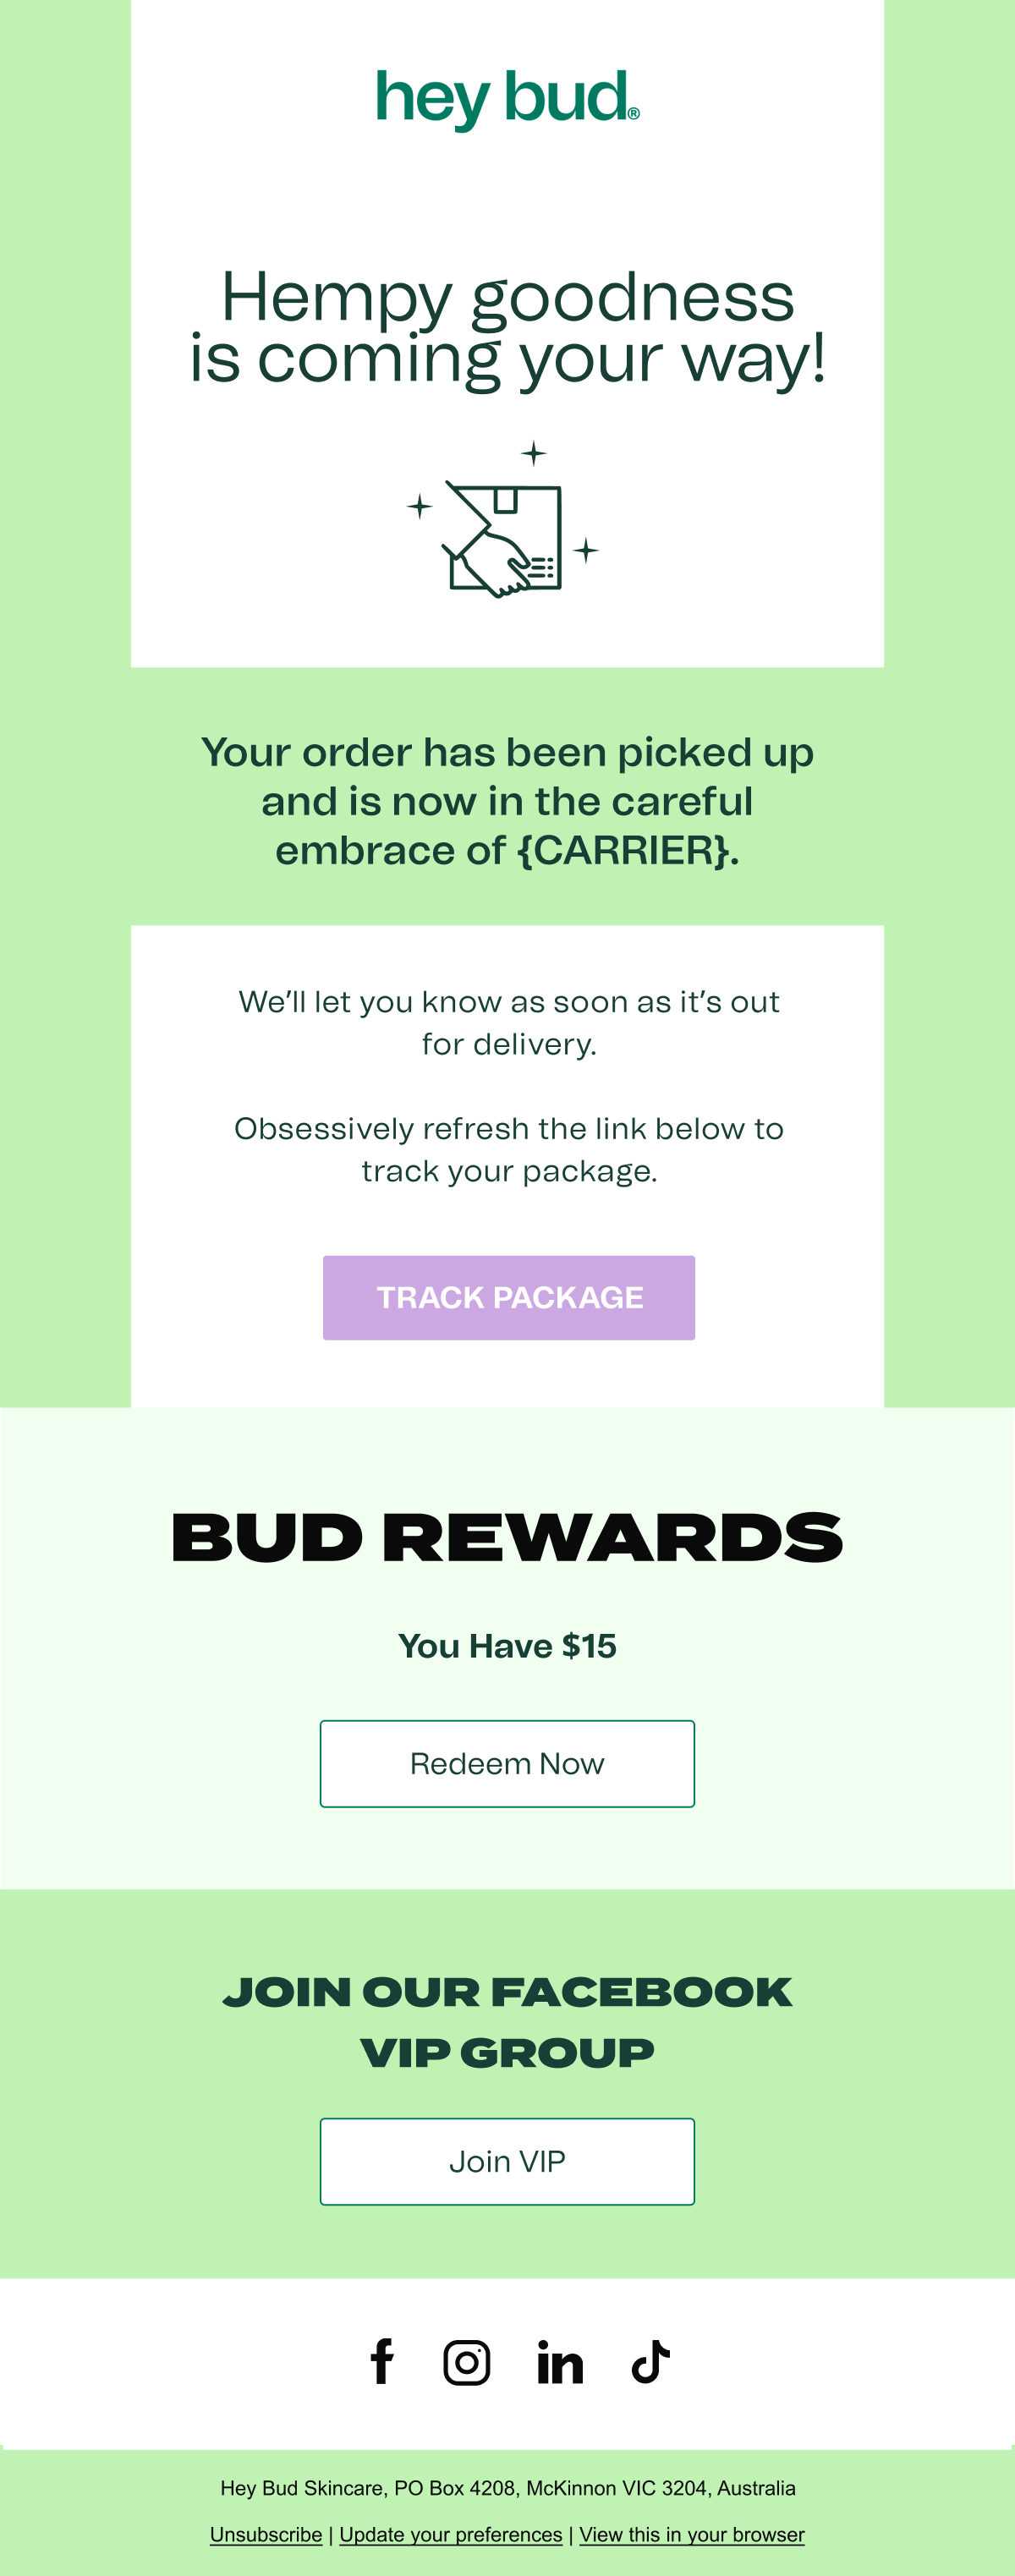 Hey Bud Shipment Picked Up Industry Email Template screenshot